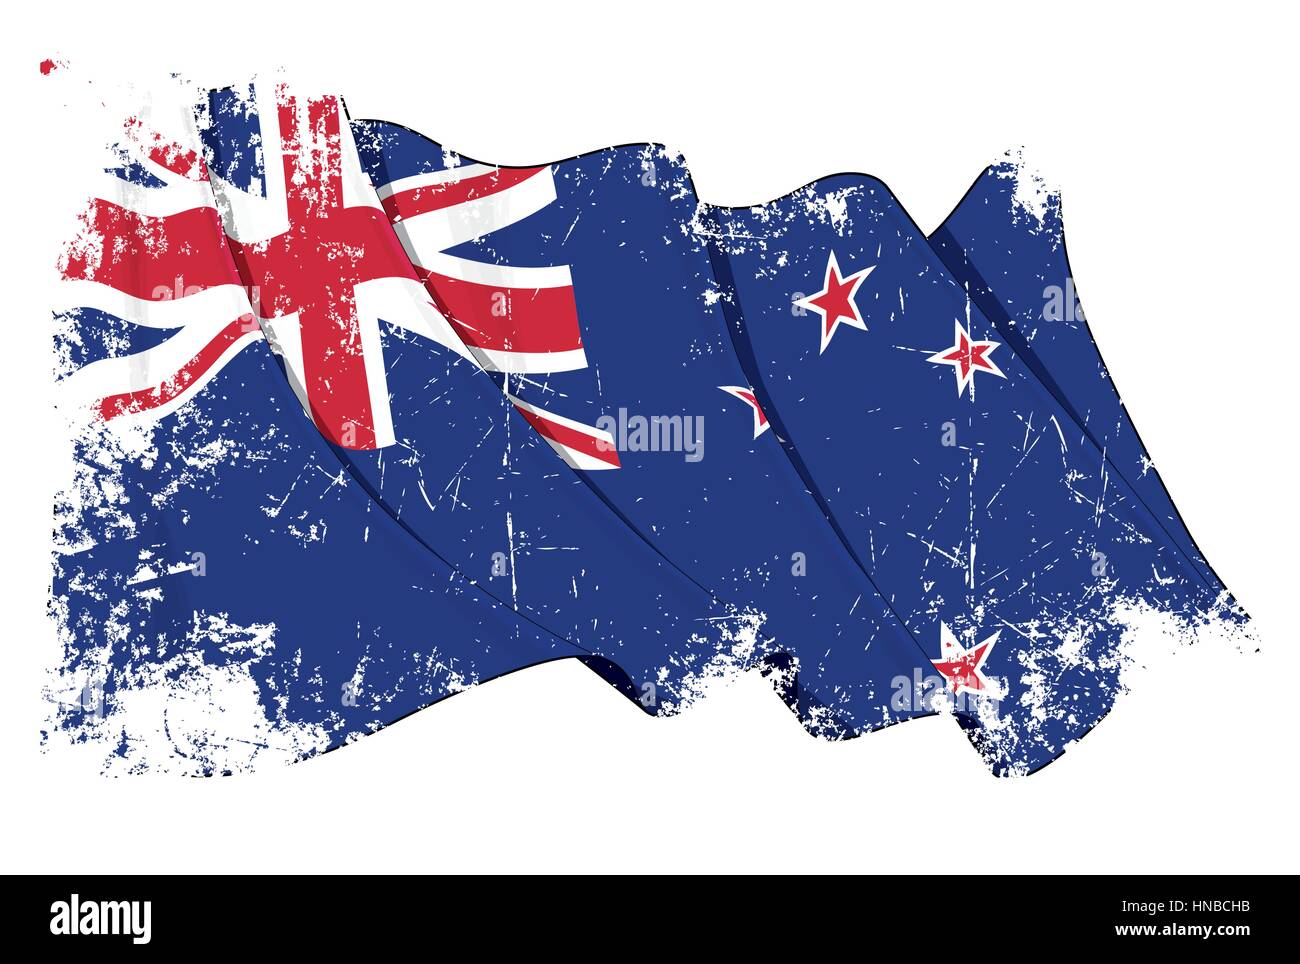 Grunge Vector Illustration of a Waving New Zealand Flag. All elements neatly organized. Texture, Lines, Shading & Flag Colors on separate layers for e Stock Vector